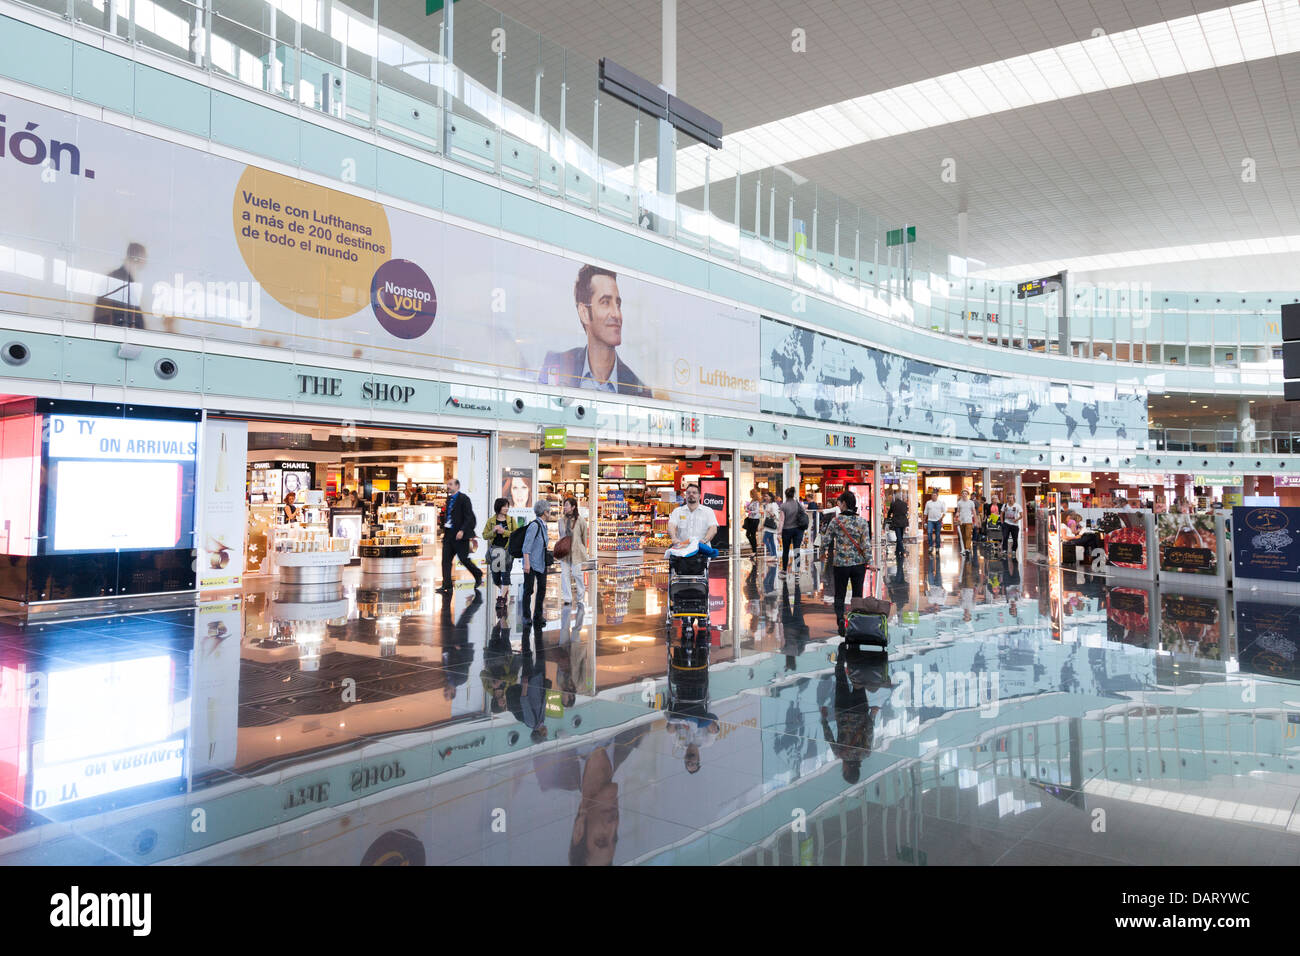 Barcelona airport, Spain store business Stock Photo - Alamy